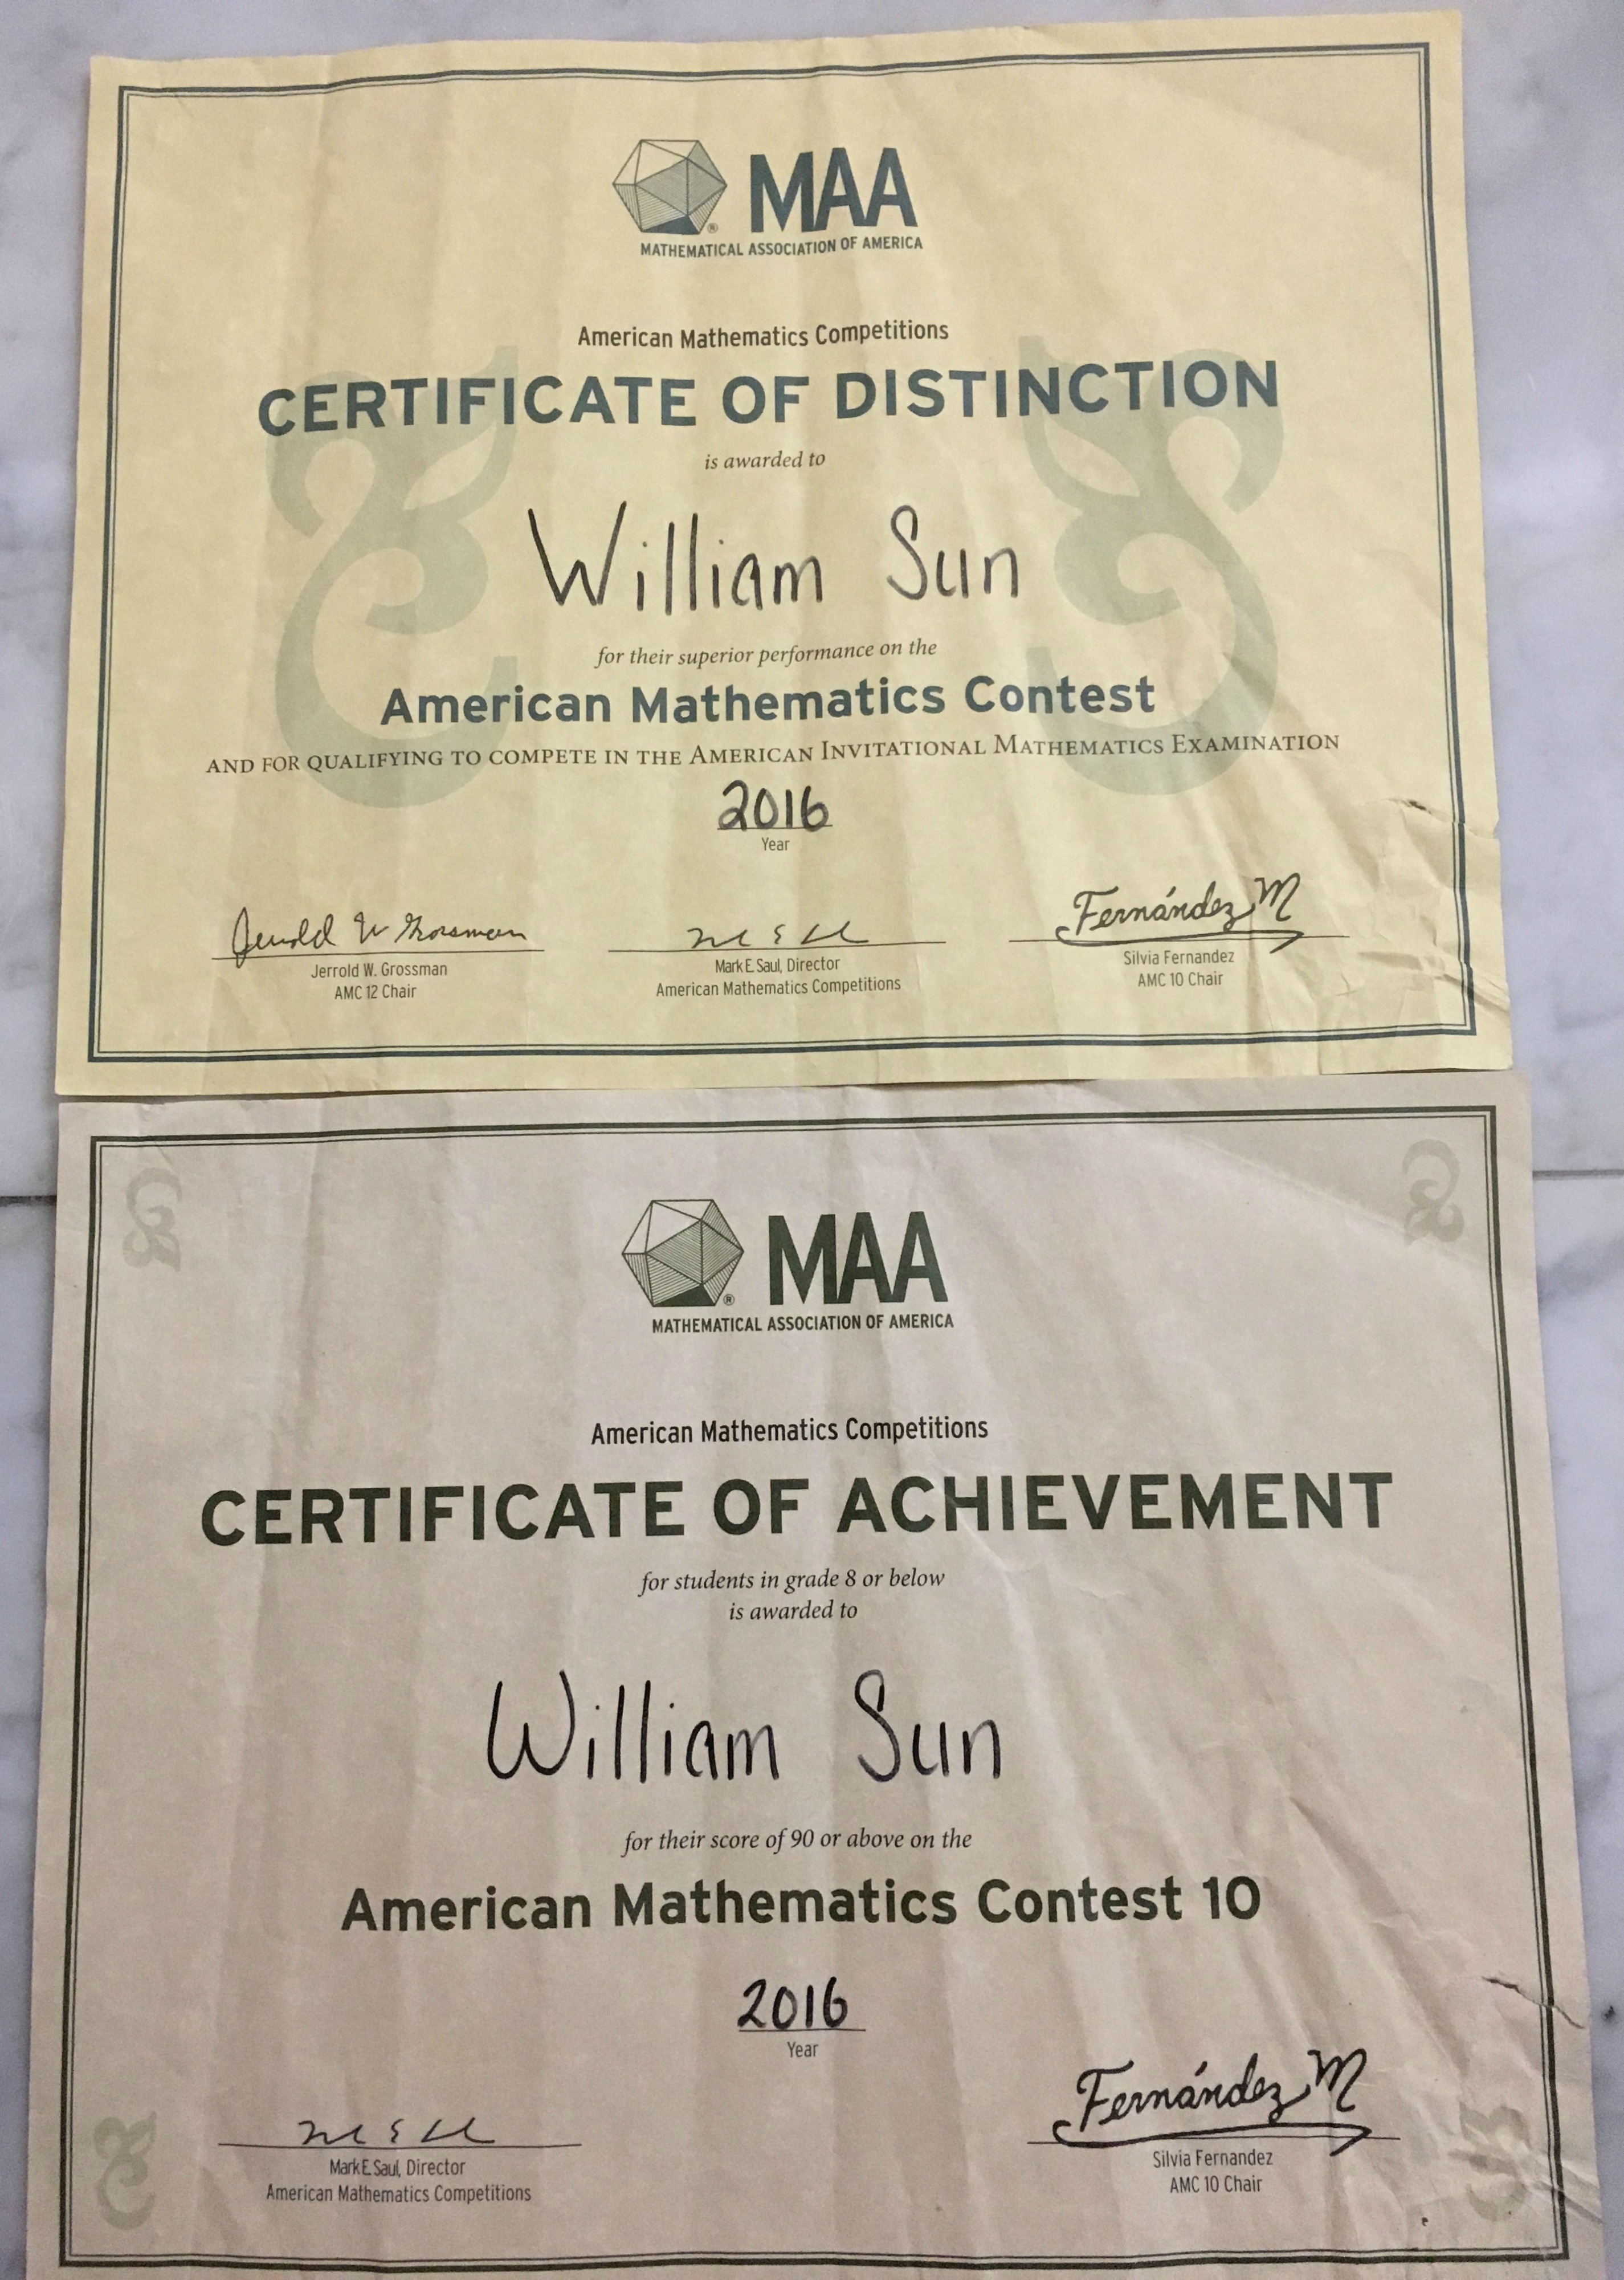 My certificates from qualifying for the AIME